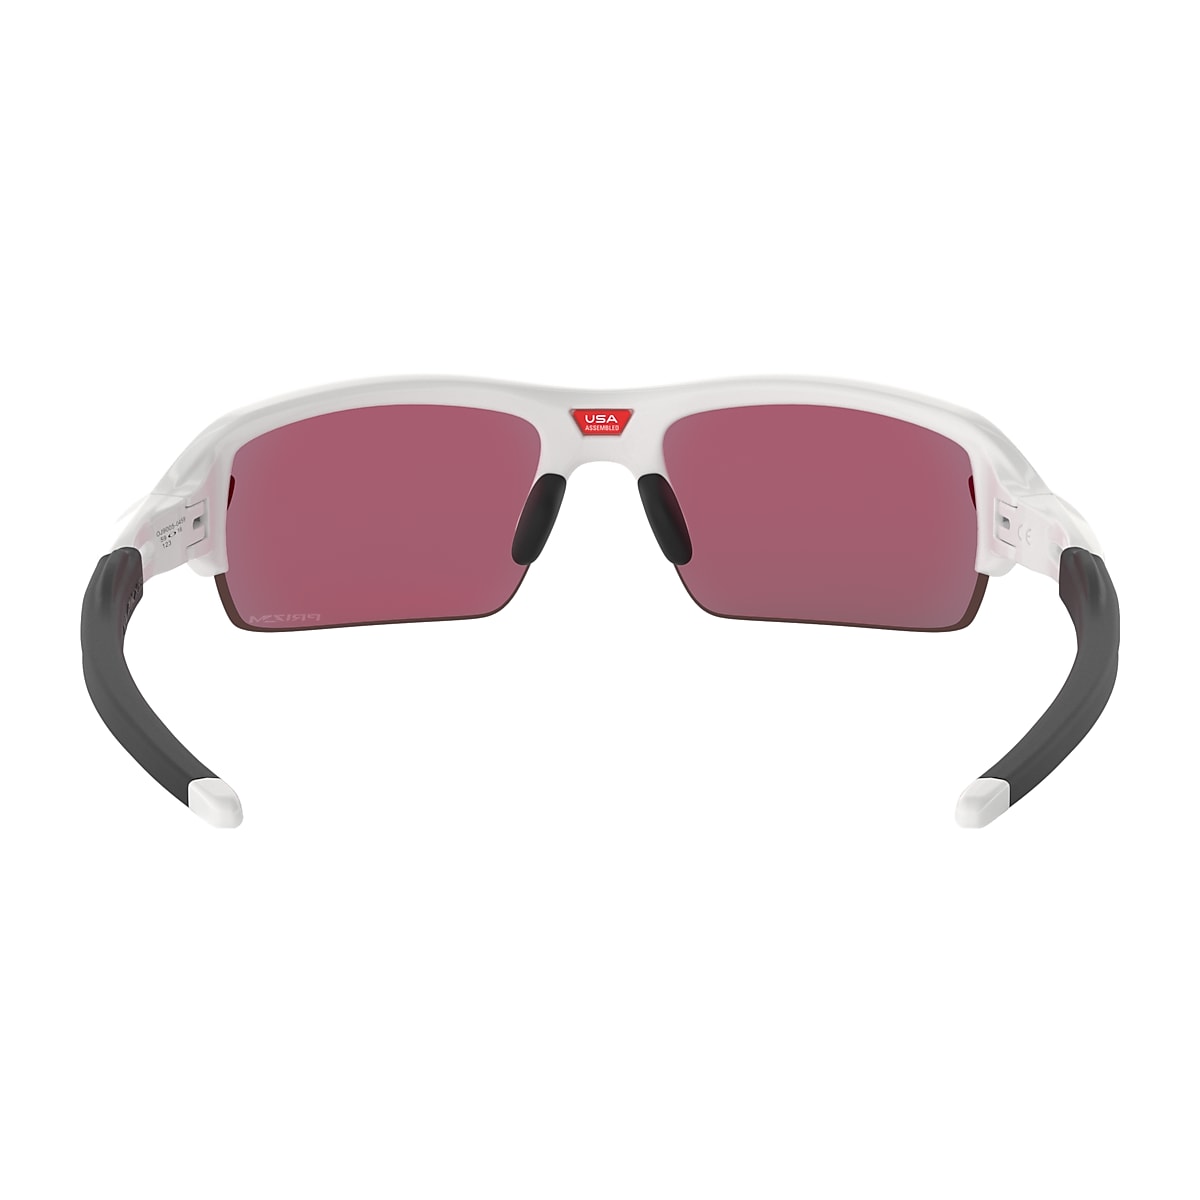 Flak® XS (Youth Fit) Prizm Field Lenses, Polished White Frame Sunglasses |  Oakley® US